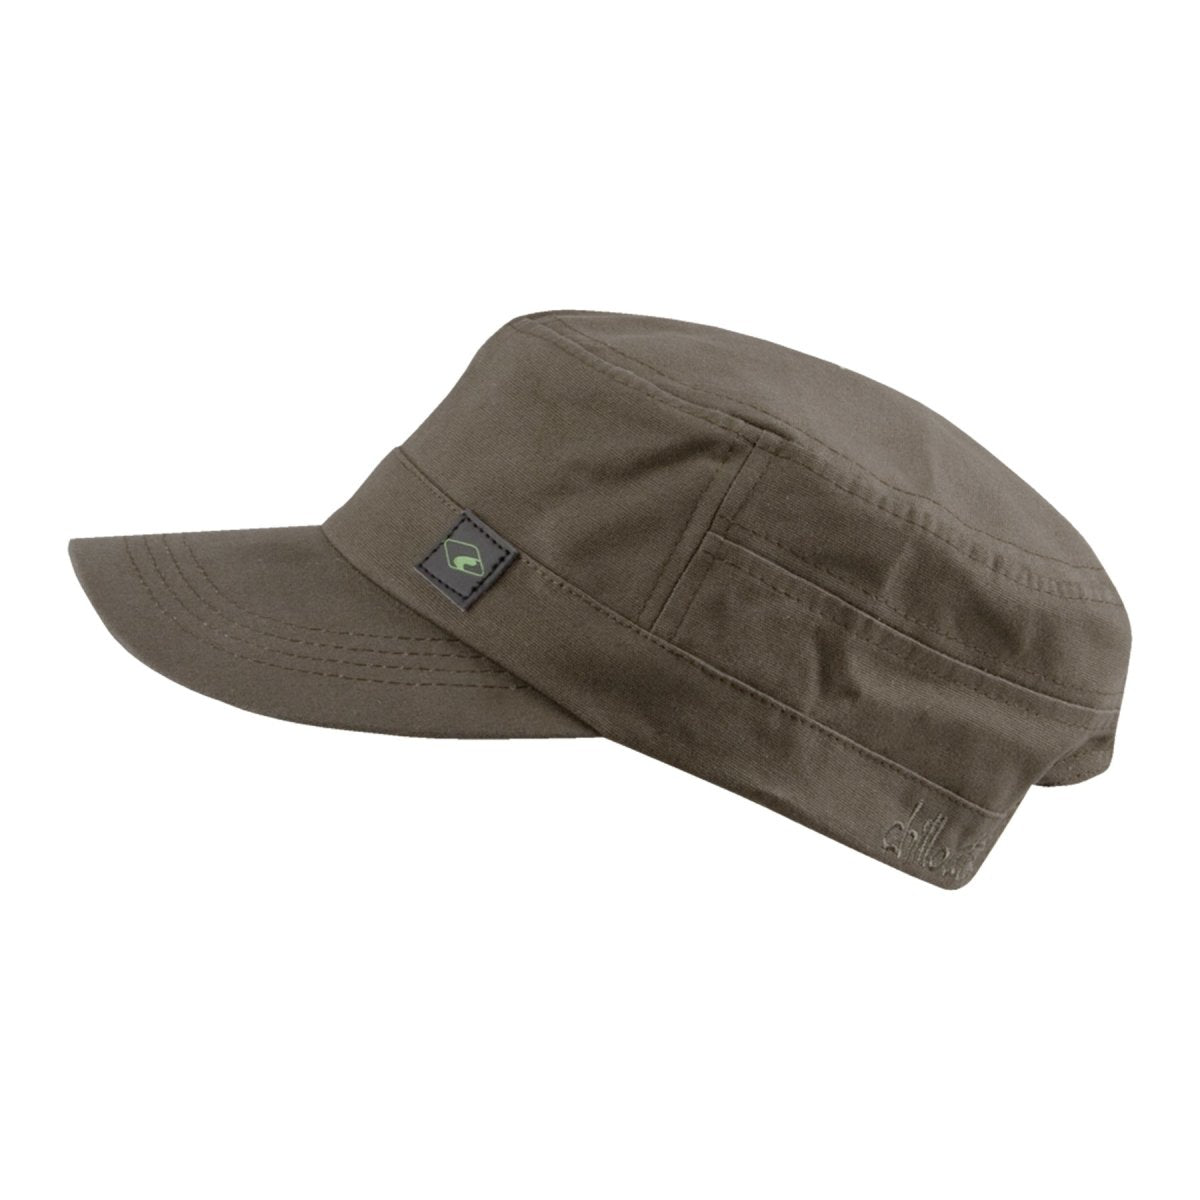 Military cap in natural colors Headwear - made Chillouts now! cotton online – of buy